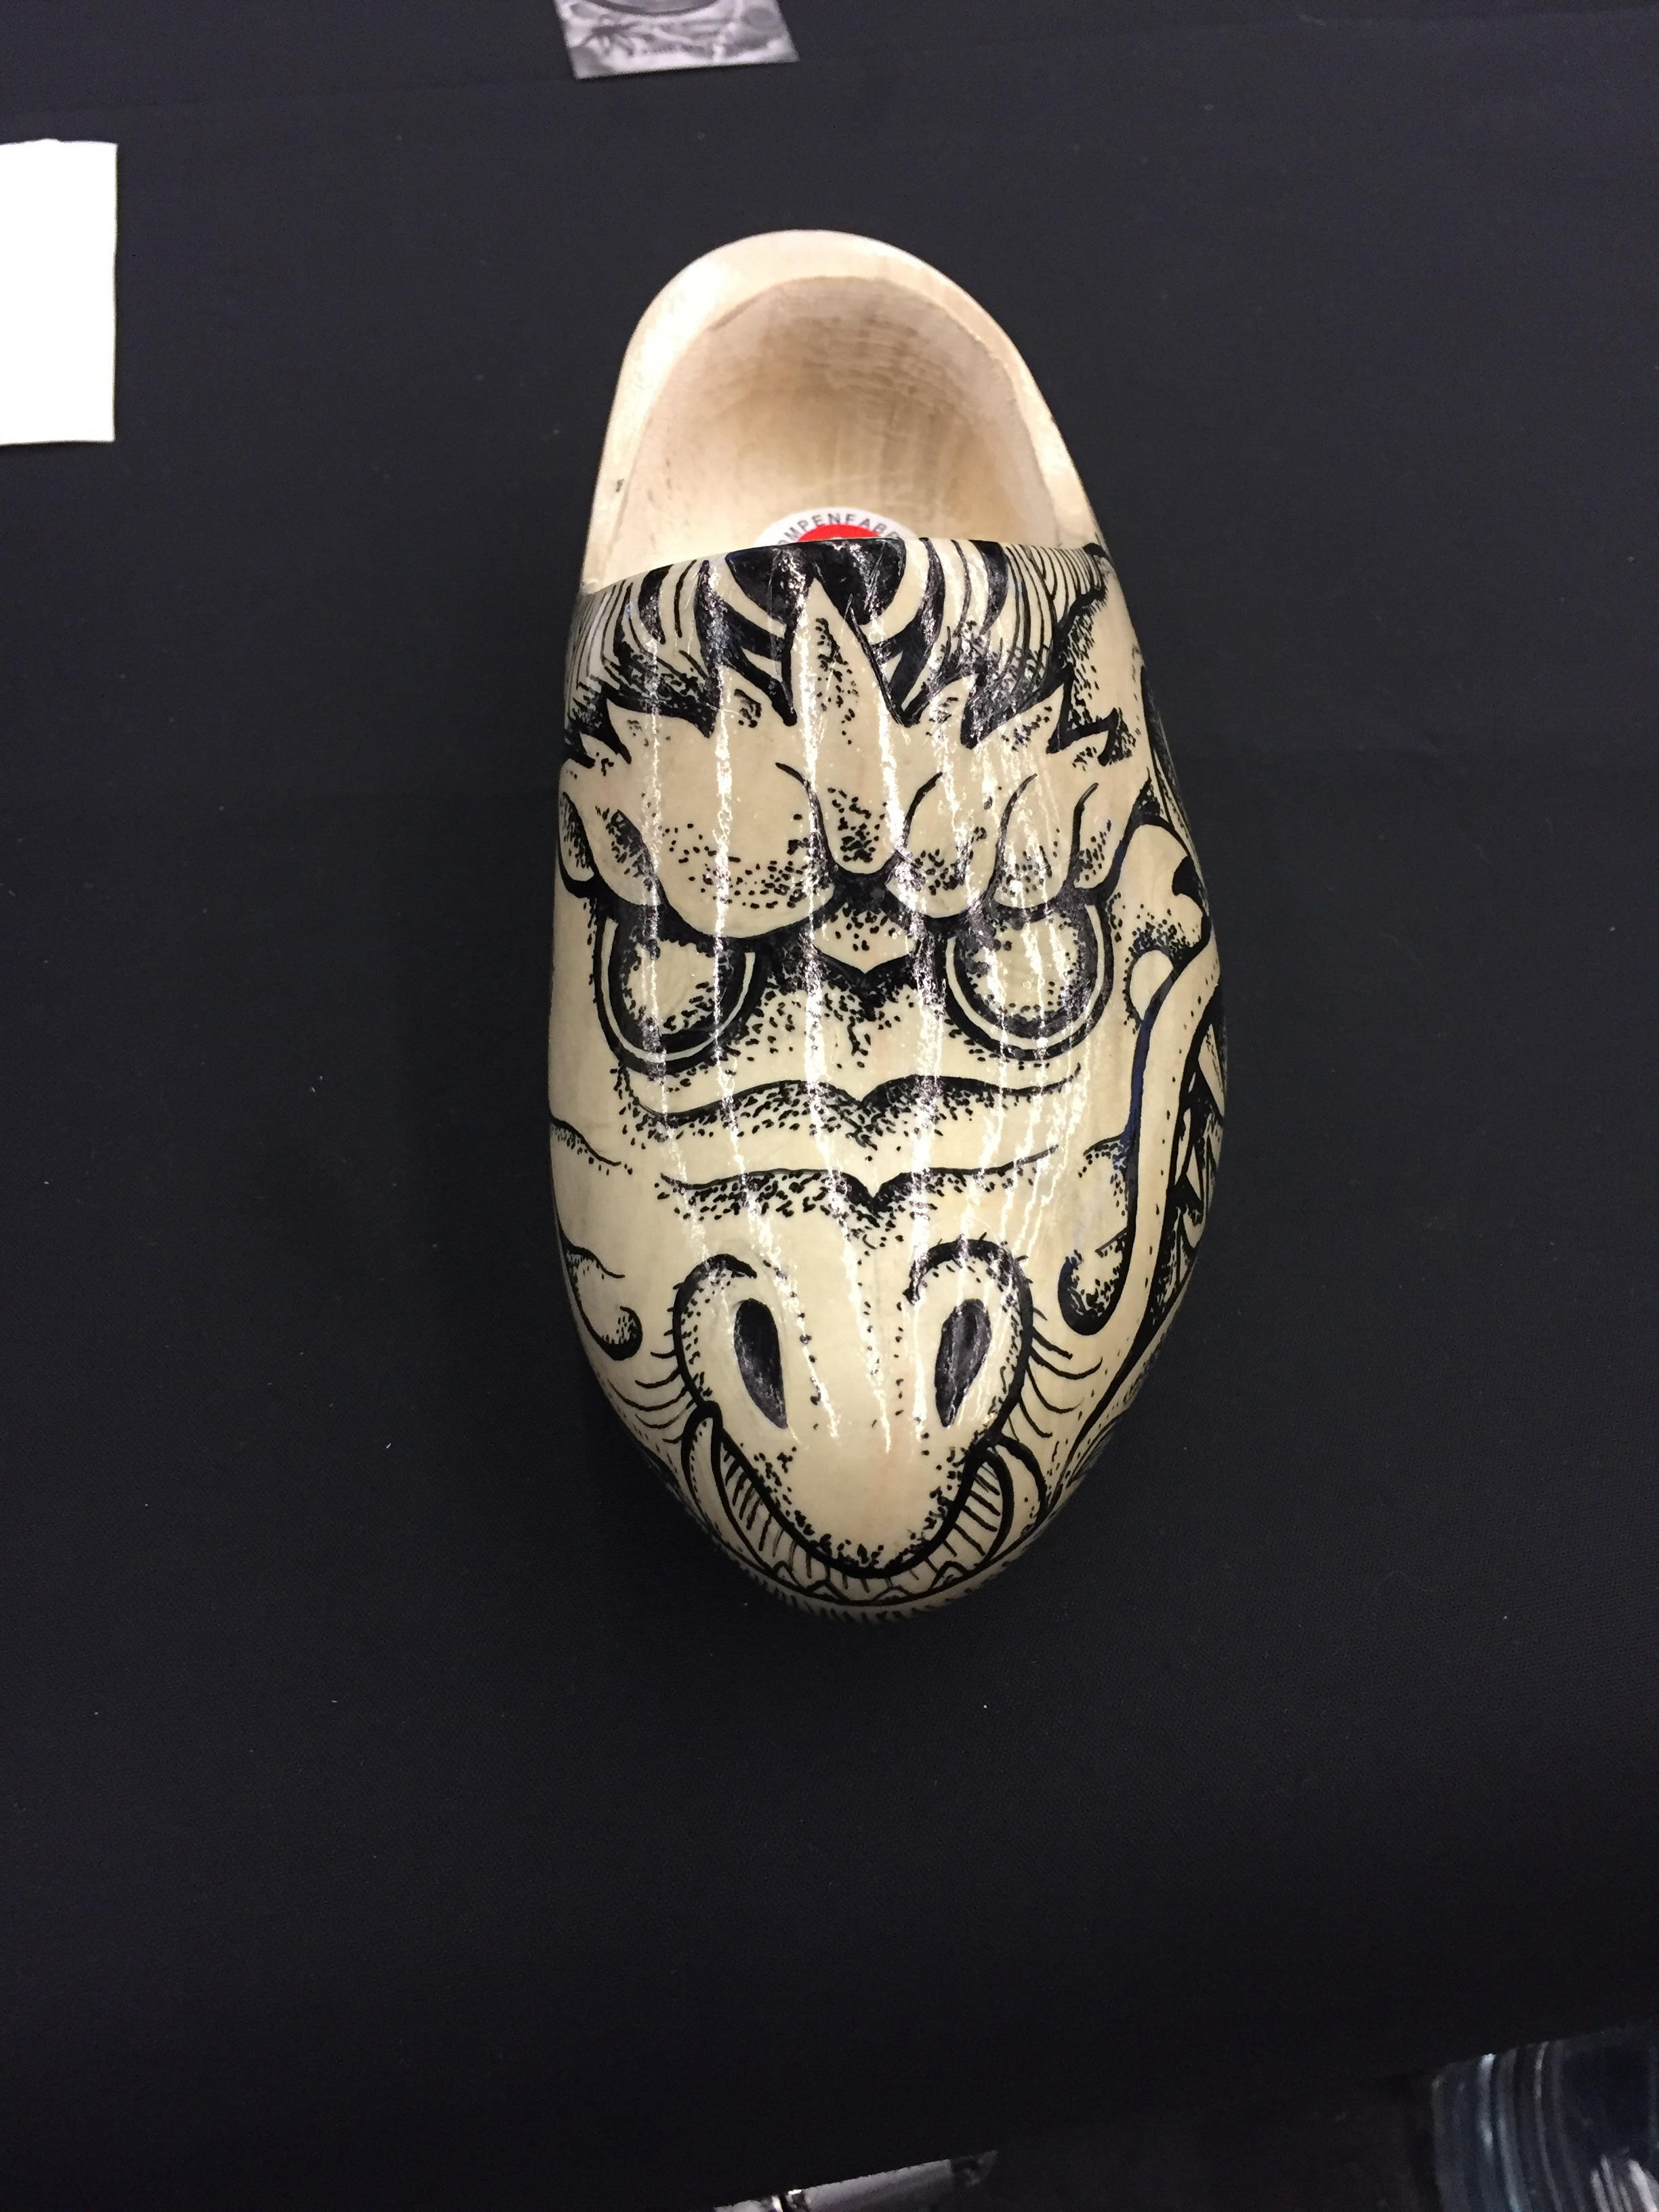 Clog Art for Charity